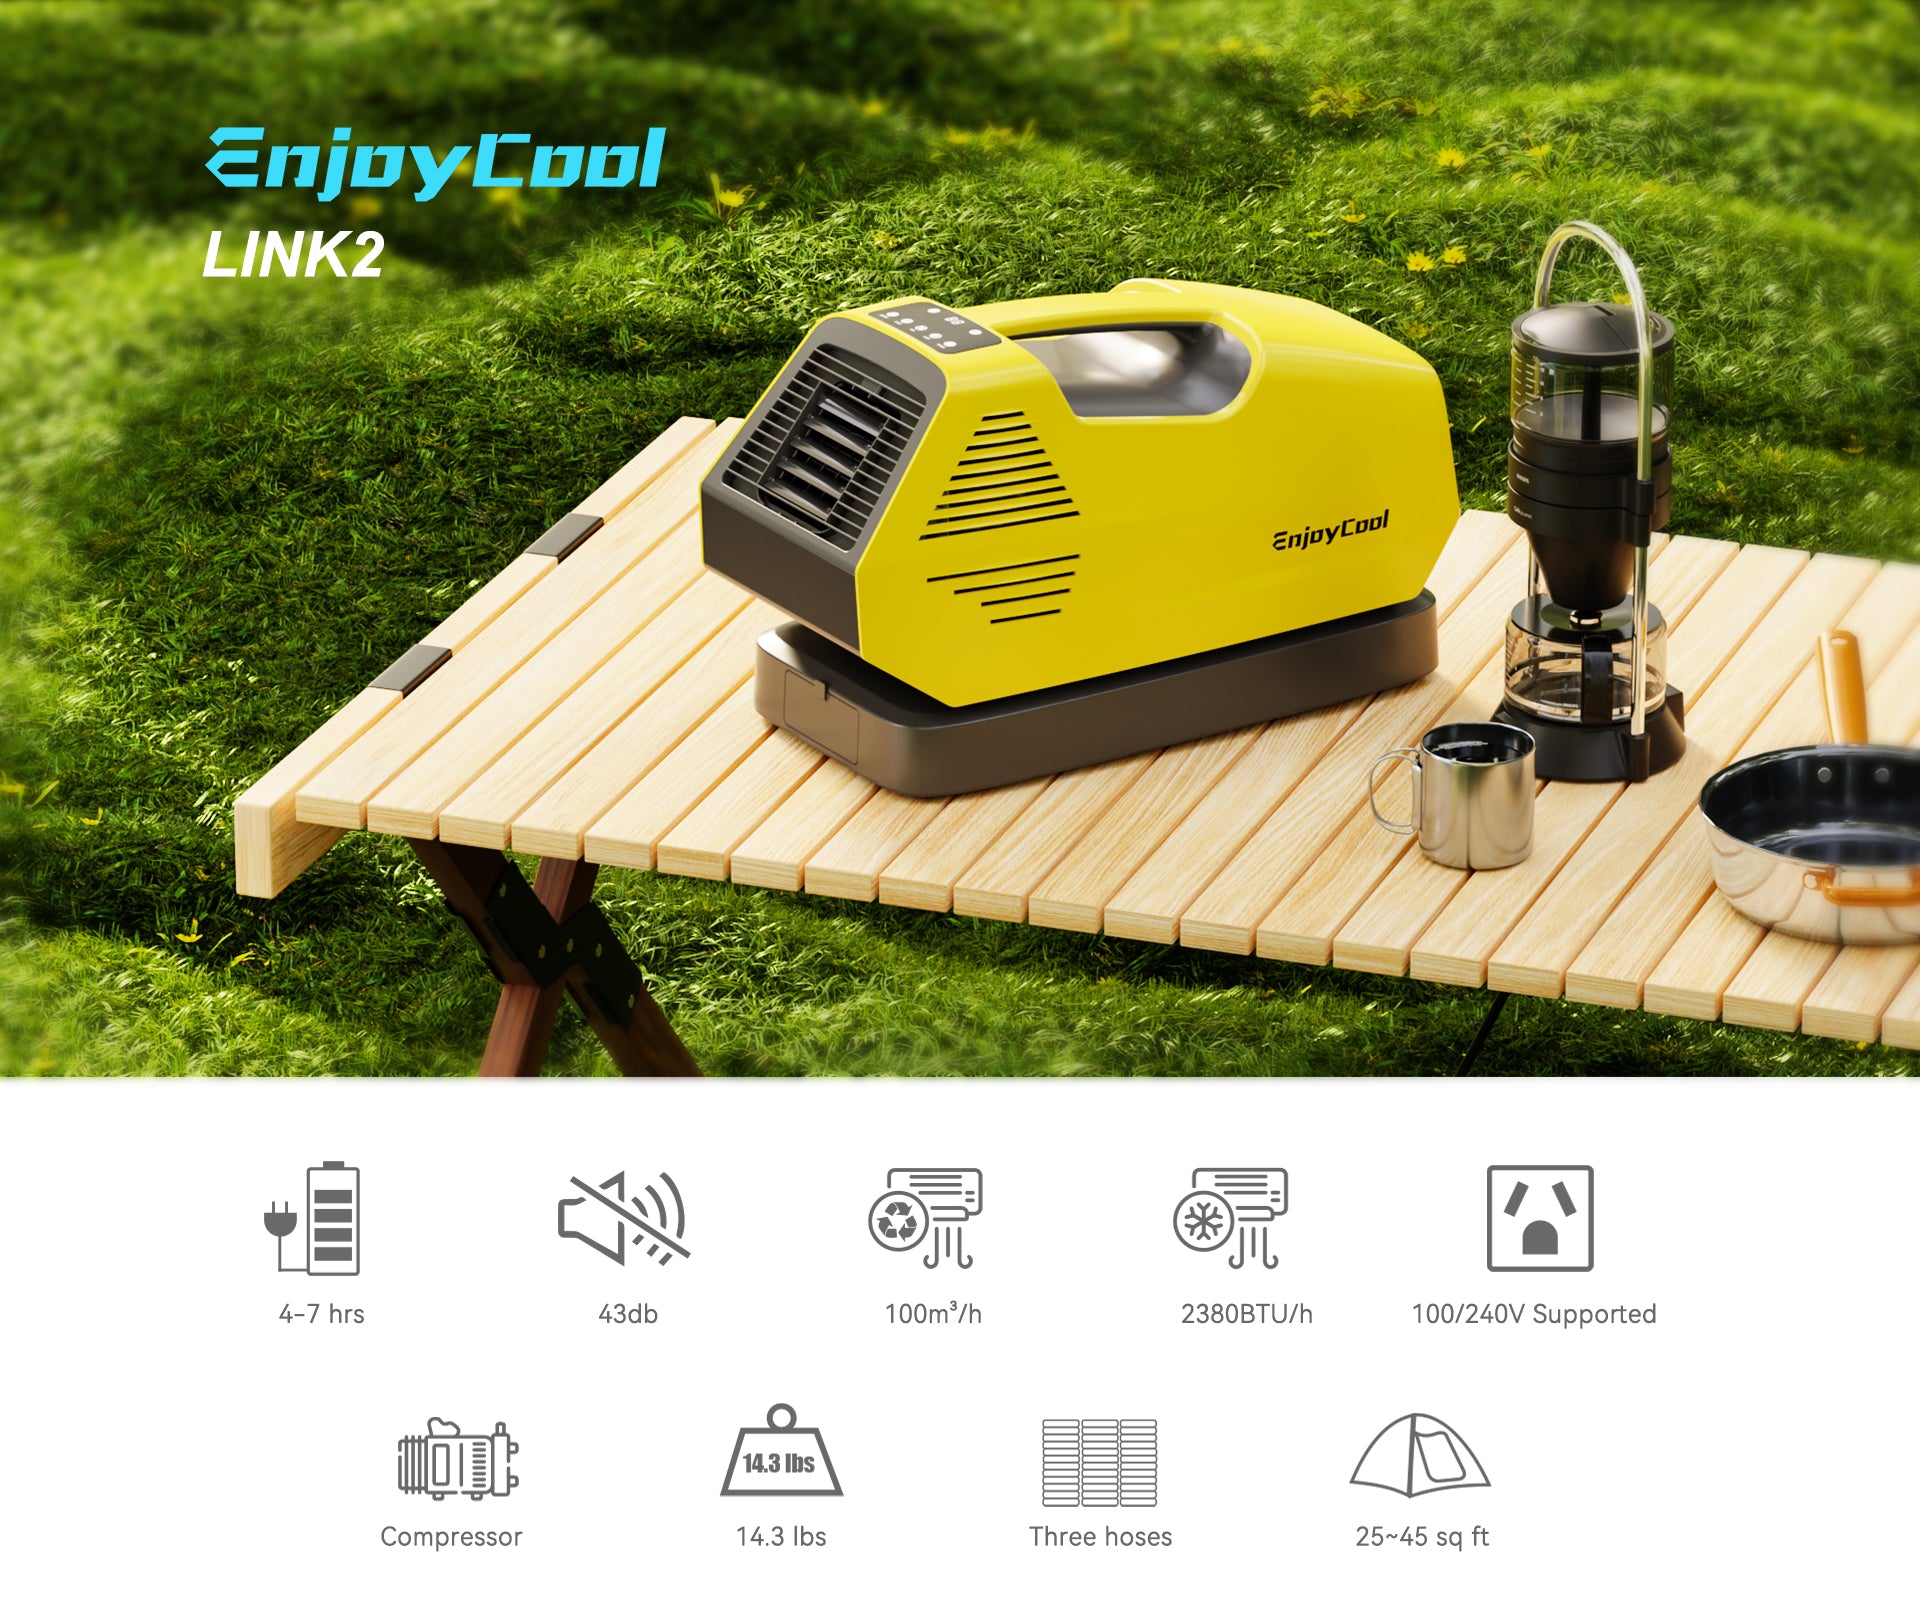 Take link2 （portable air conditoners，porable ac，standing airconditioner）and go deep into the embrace of nature and explore the magnificent natural scenery.